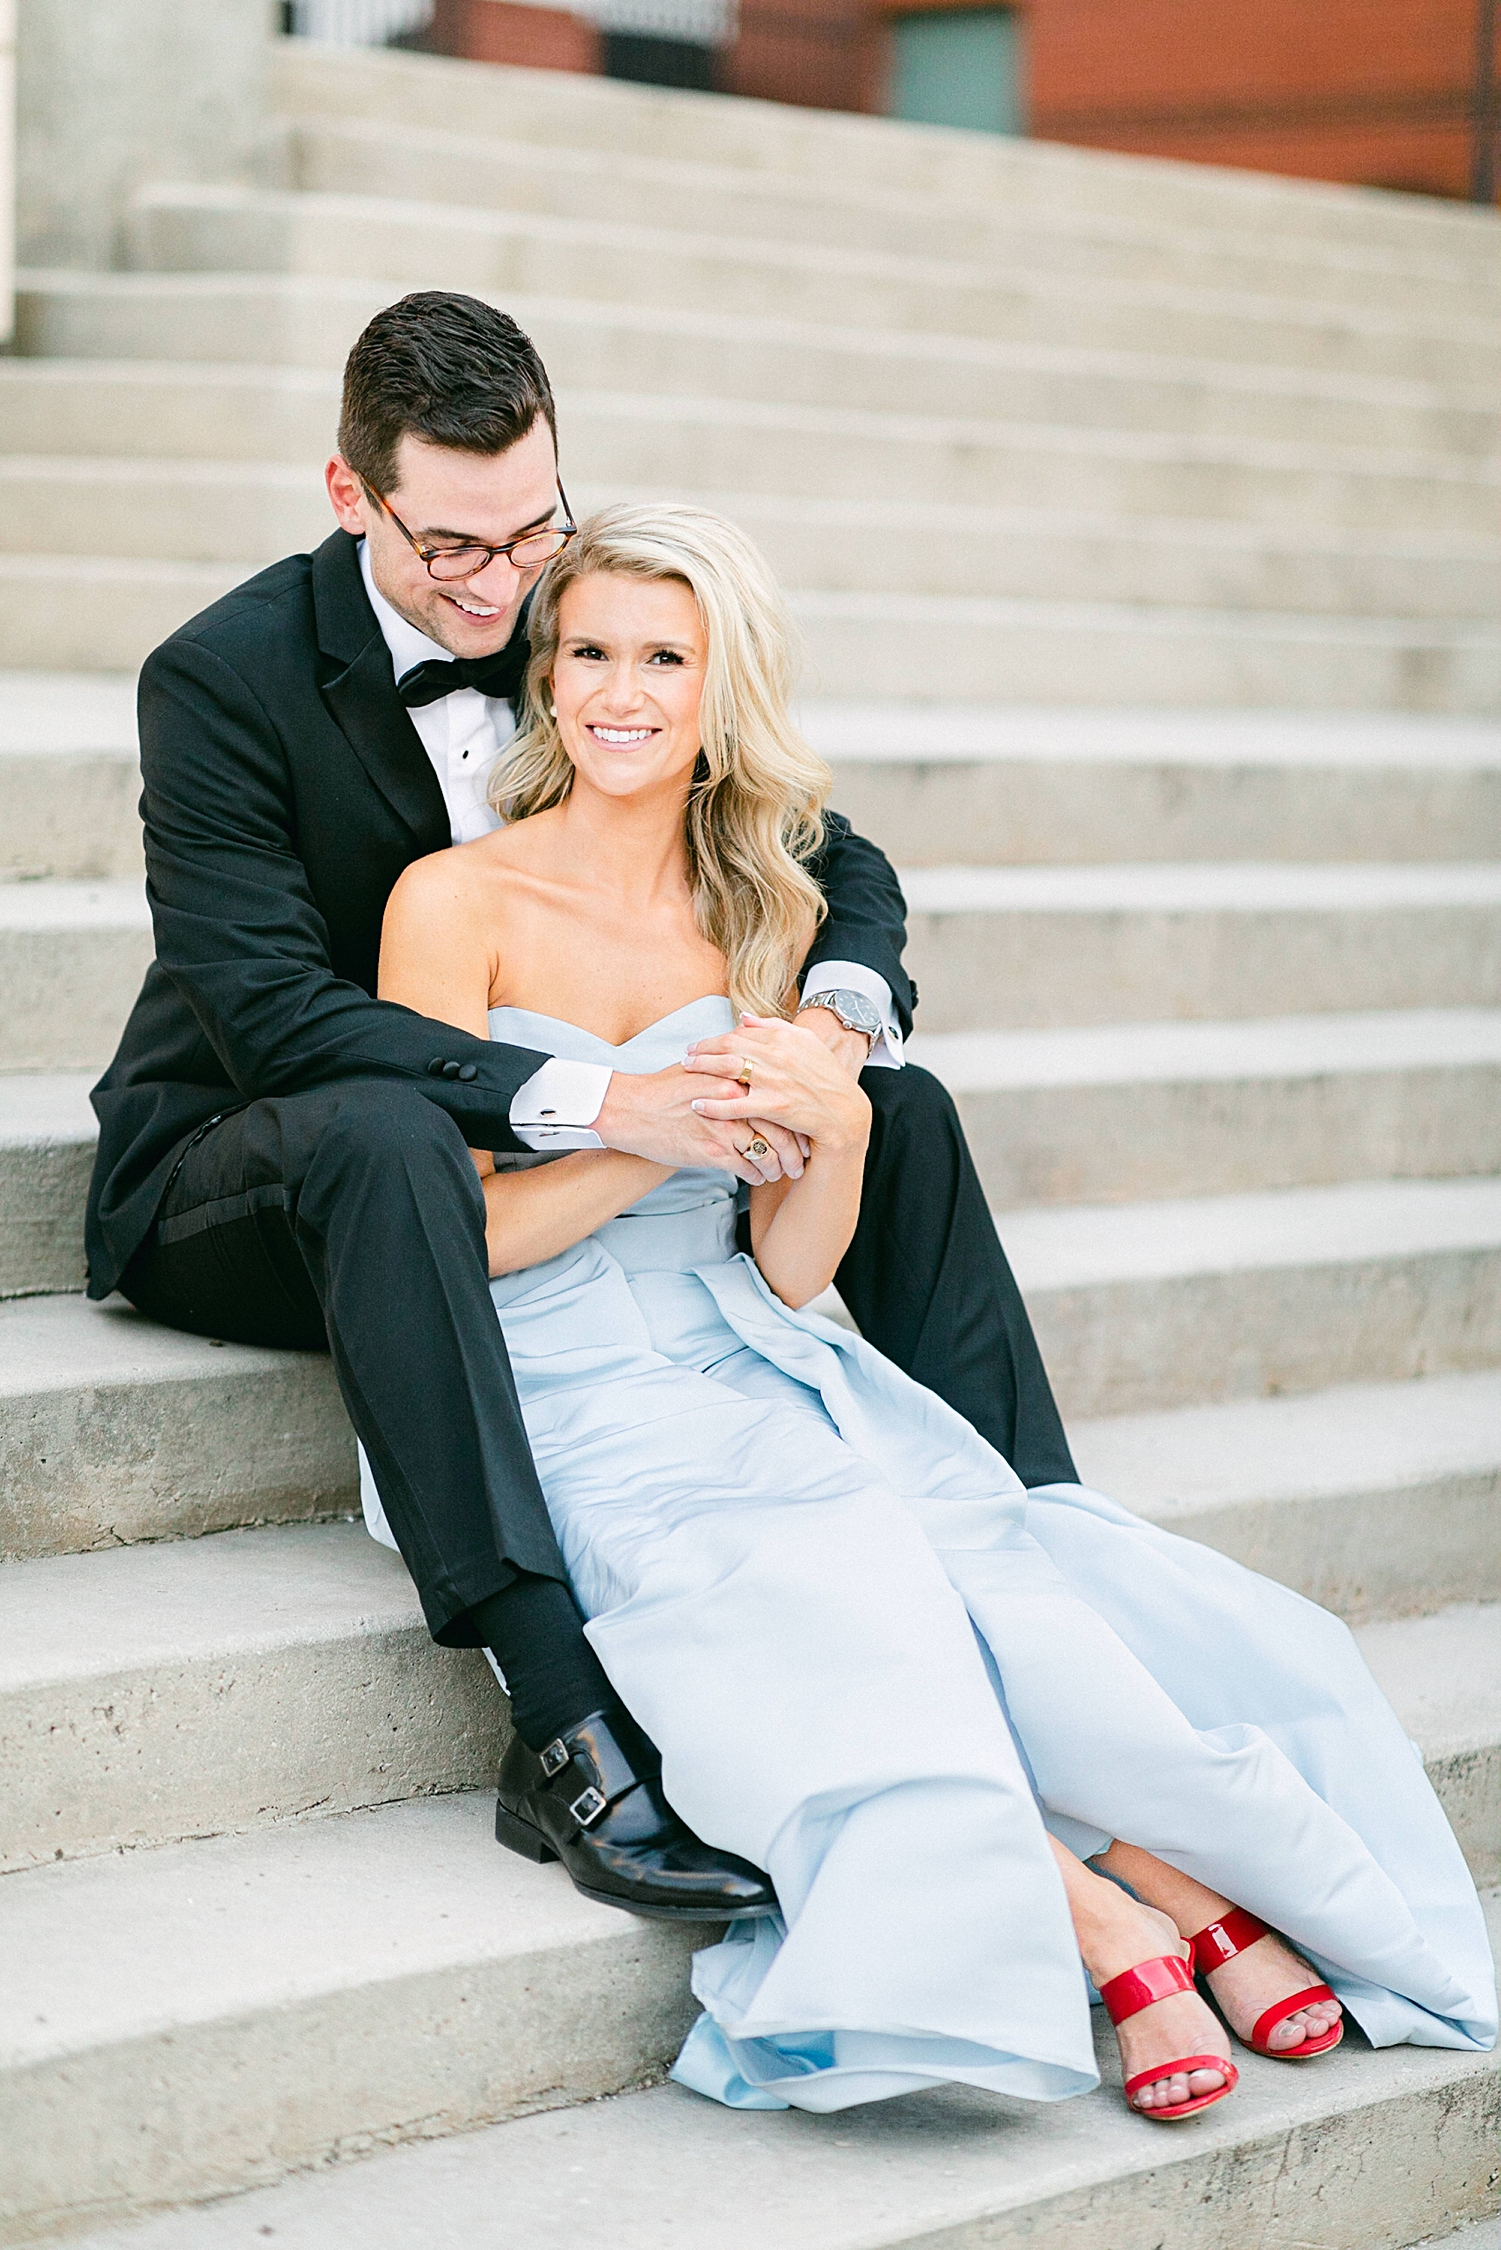 Man in black tuxedo with arms around woman in light blue jumpsuit and red shoes sitting on stairs in downtown Dallas engagement session